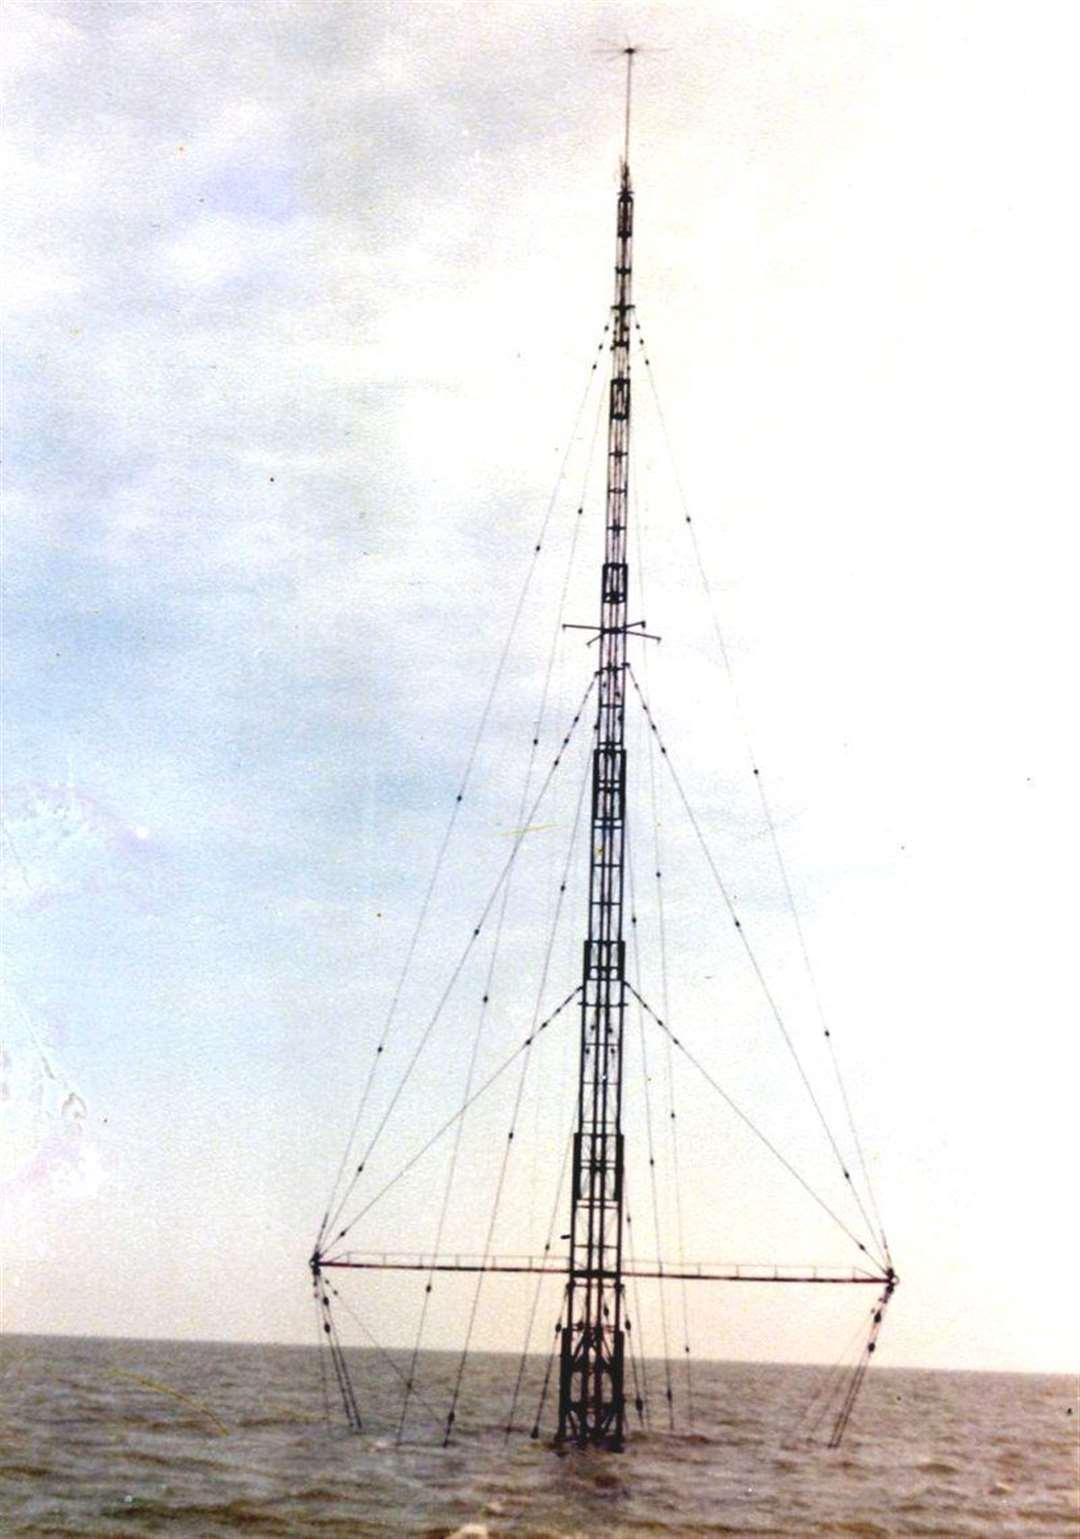 All that remained visible above the waves of Radio Caroline's Mi Amigo was the mast